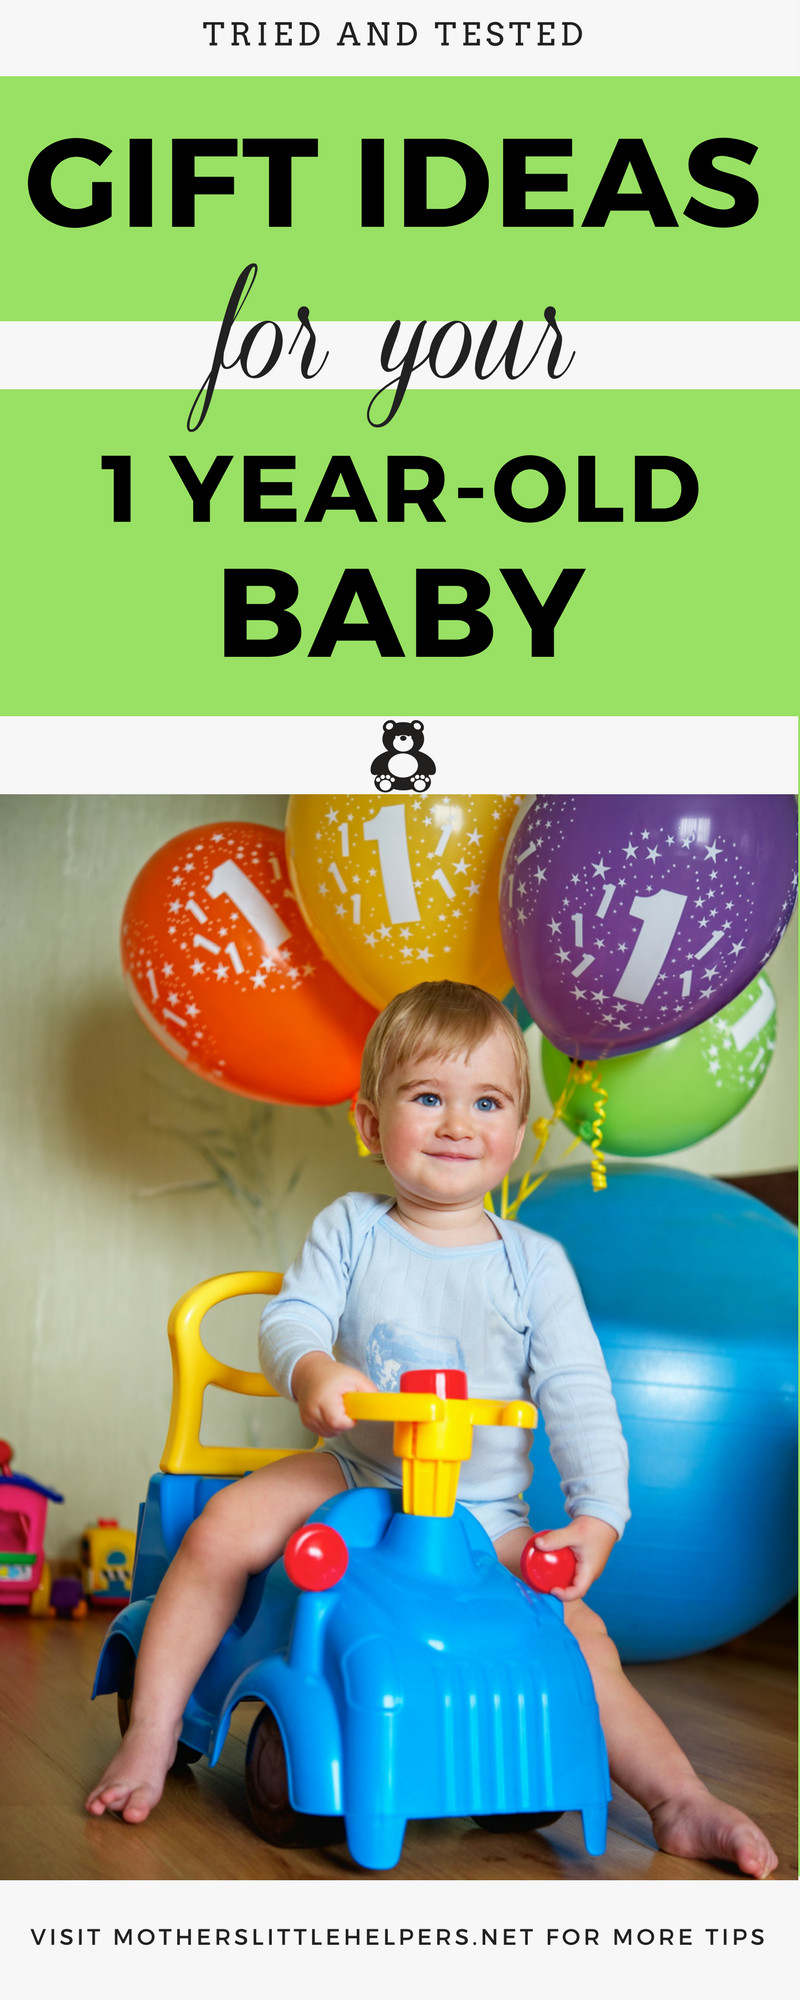 Baby Gifts For One Year Olds
 Best Gift for e Year Old Baby Gift Guide 2019